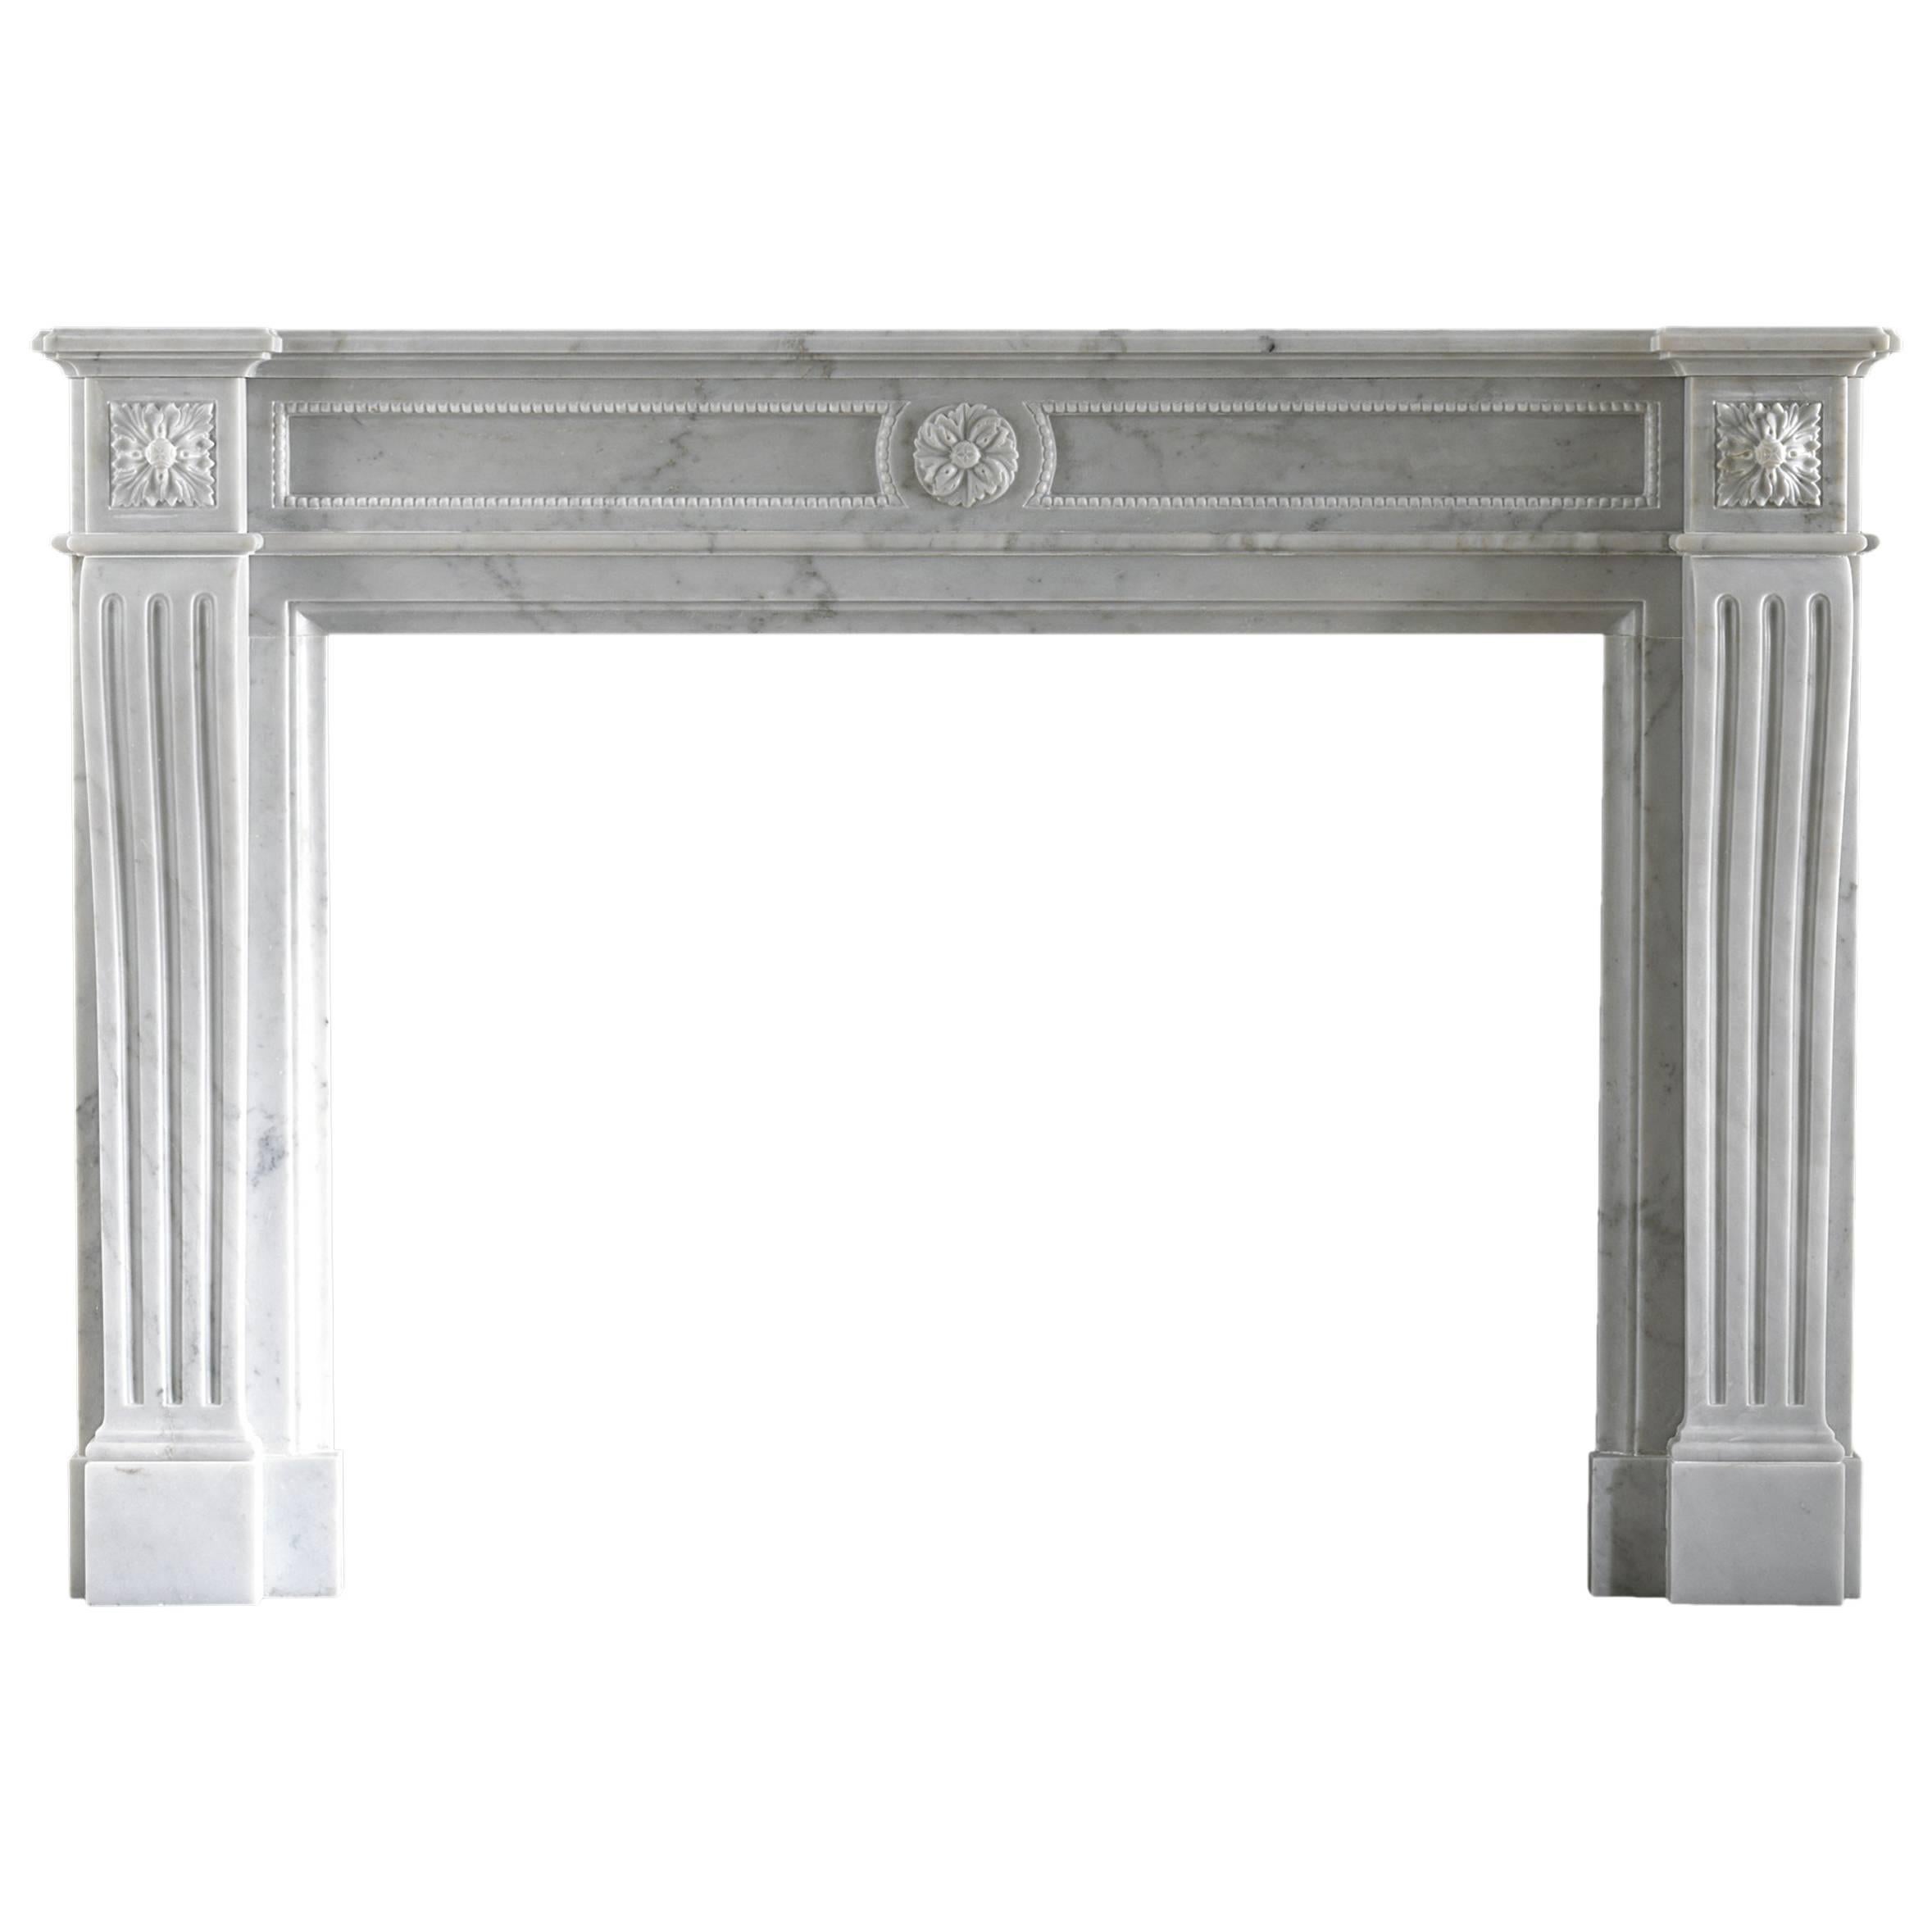 18th Century Louise XVI Reproduction Mantelpiece Carved in Marble